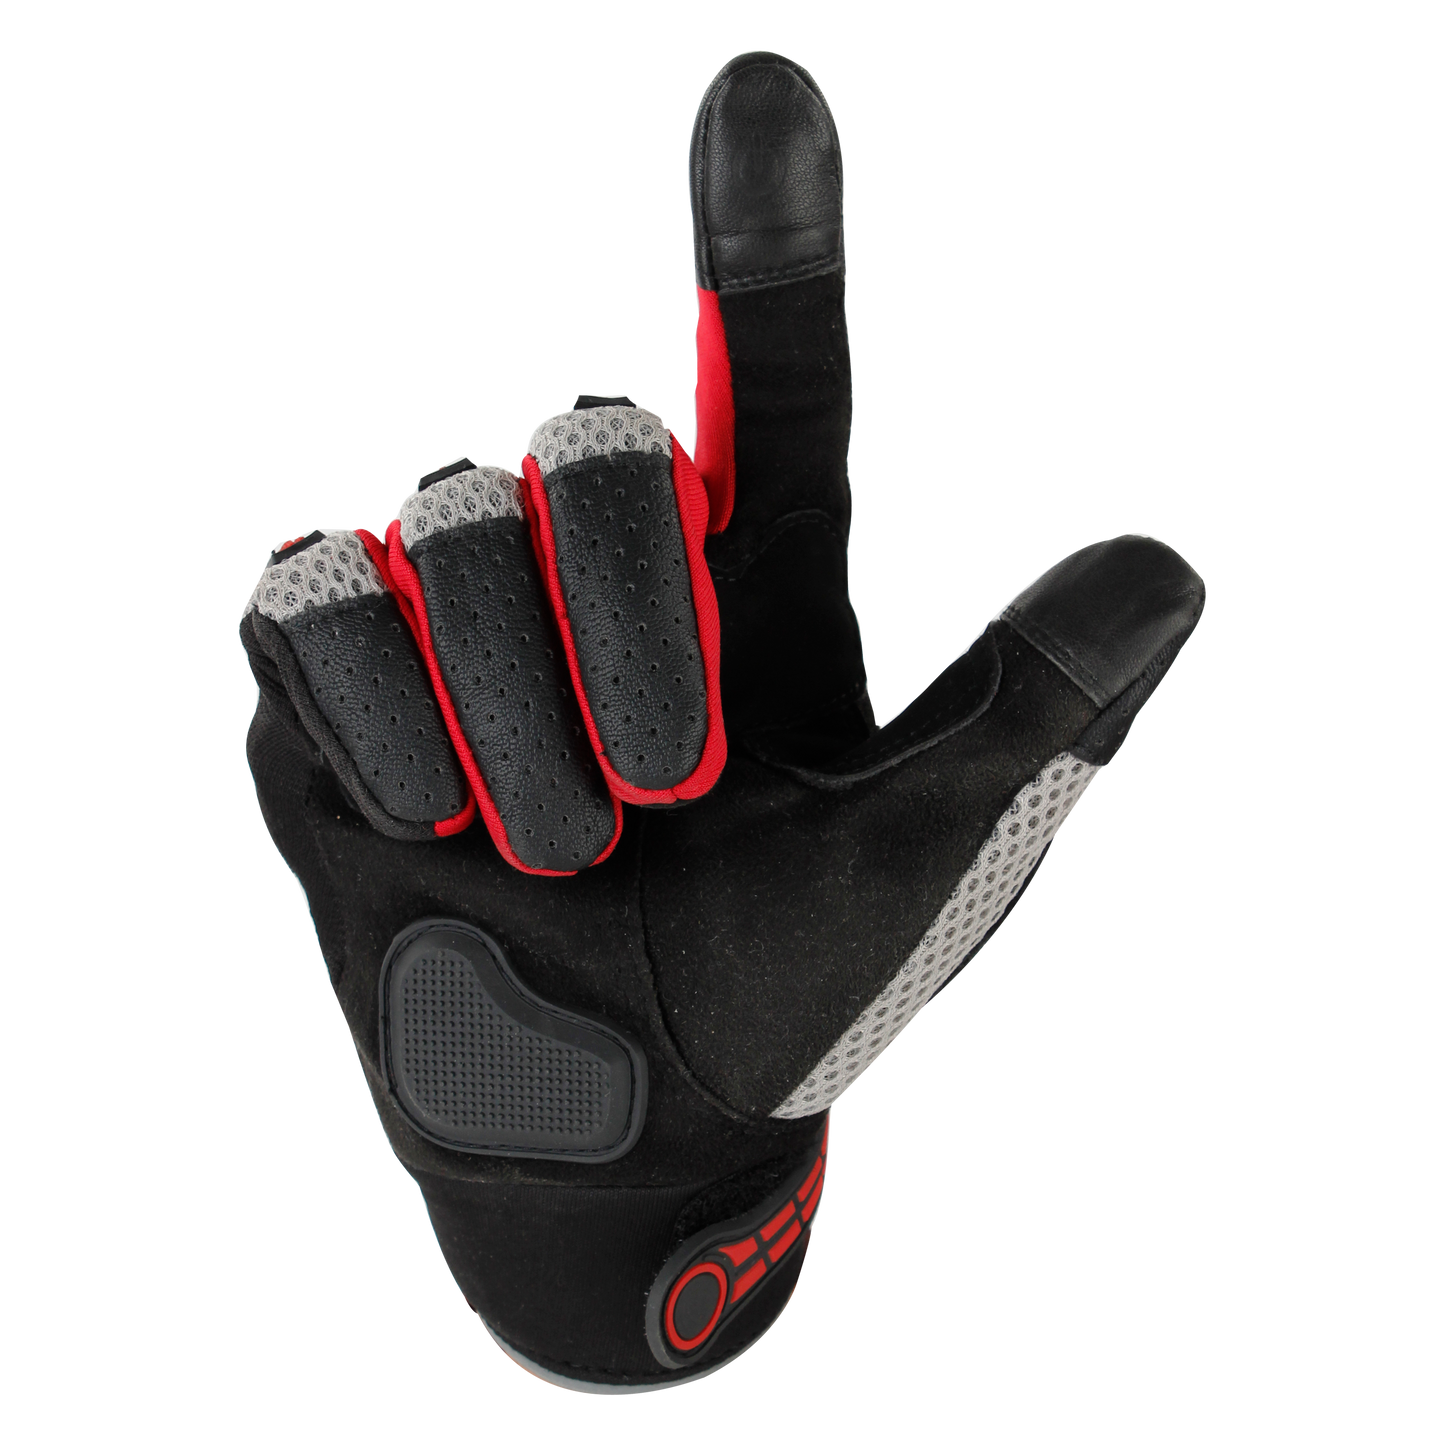 Steelbird Adventure A-1 Full Finger Riding Gloves with Touch Screen Sensitivity at Thumb and Index Finger, Protective Off-Road Motorbike Racing (Red)